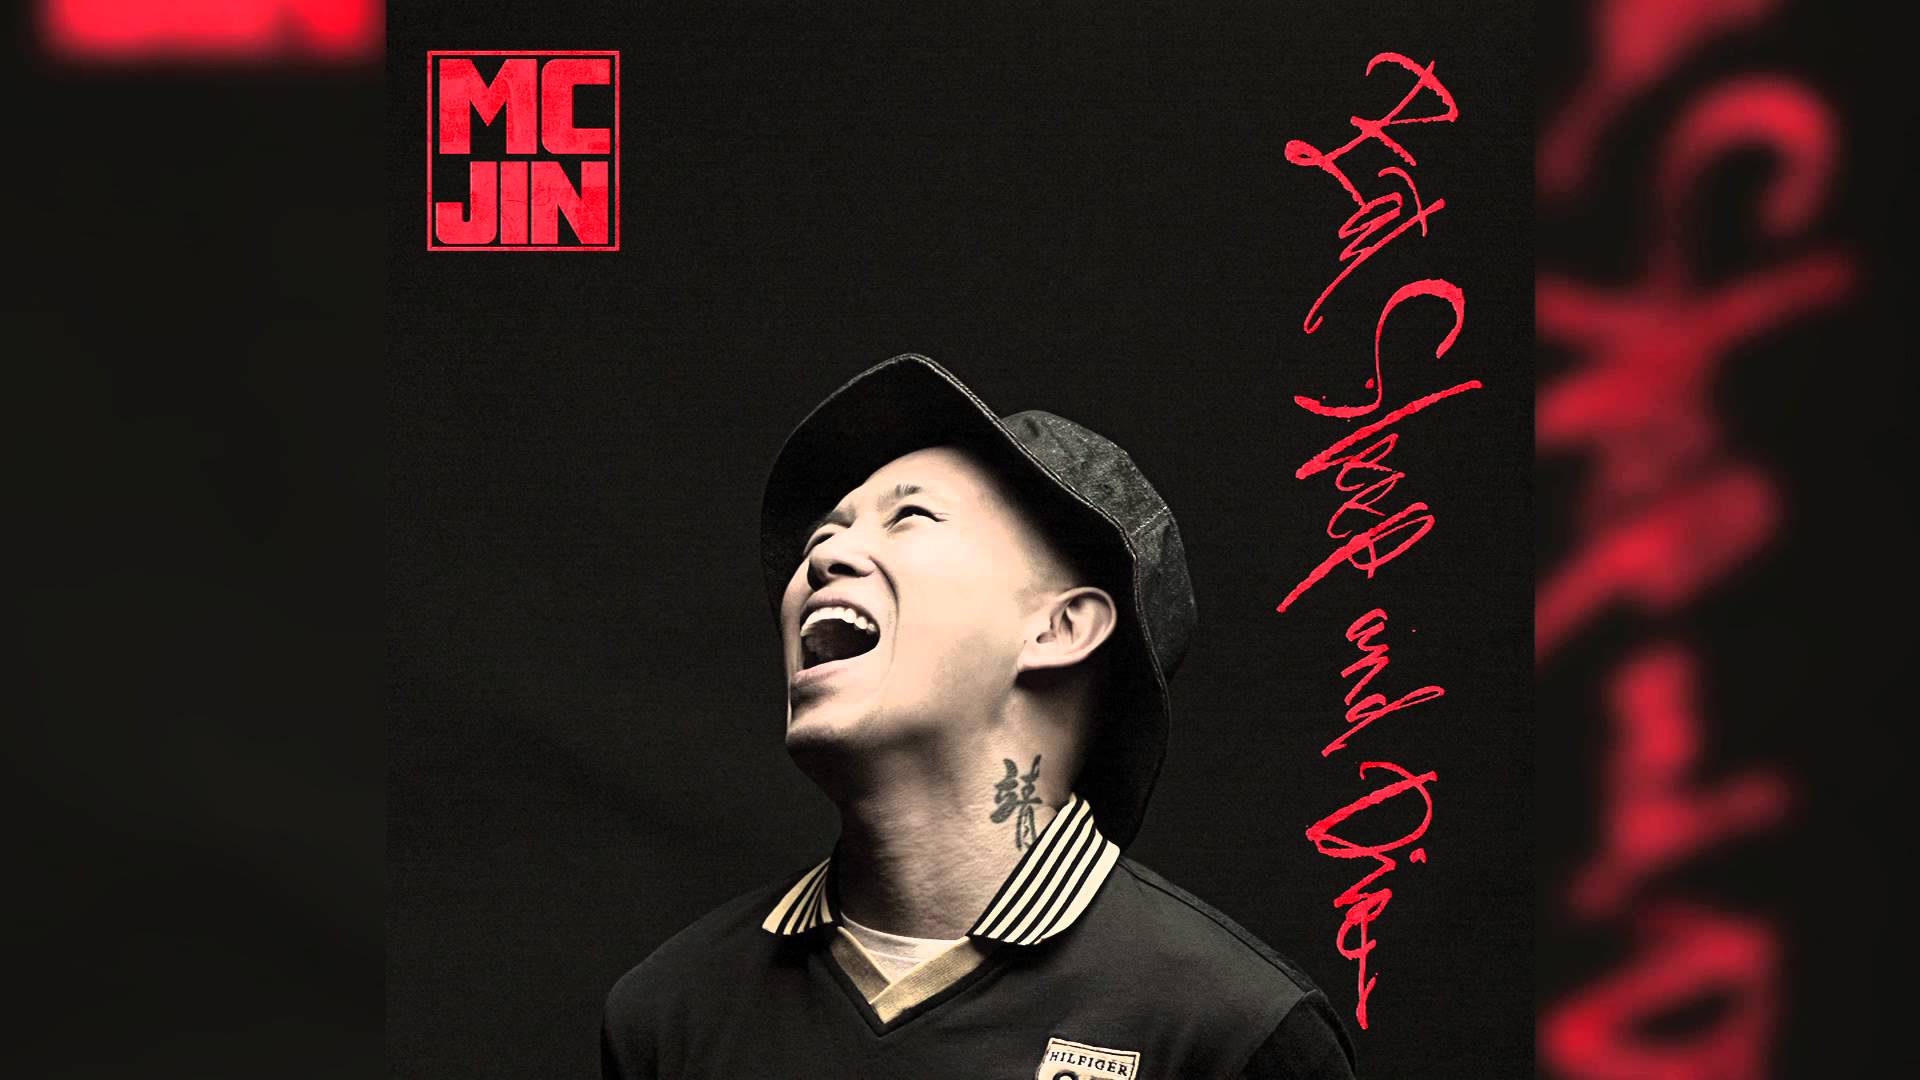 pictures-of-mc-jin